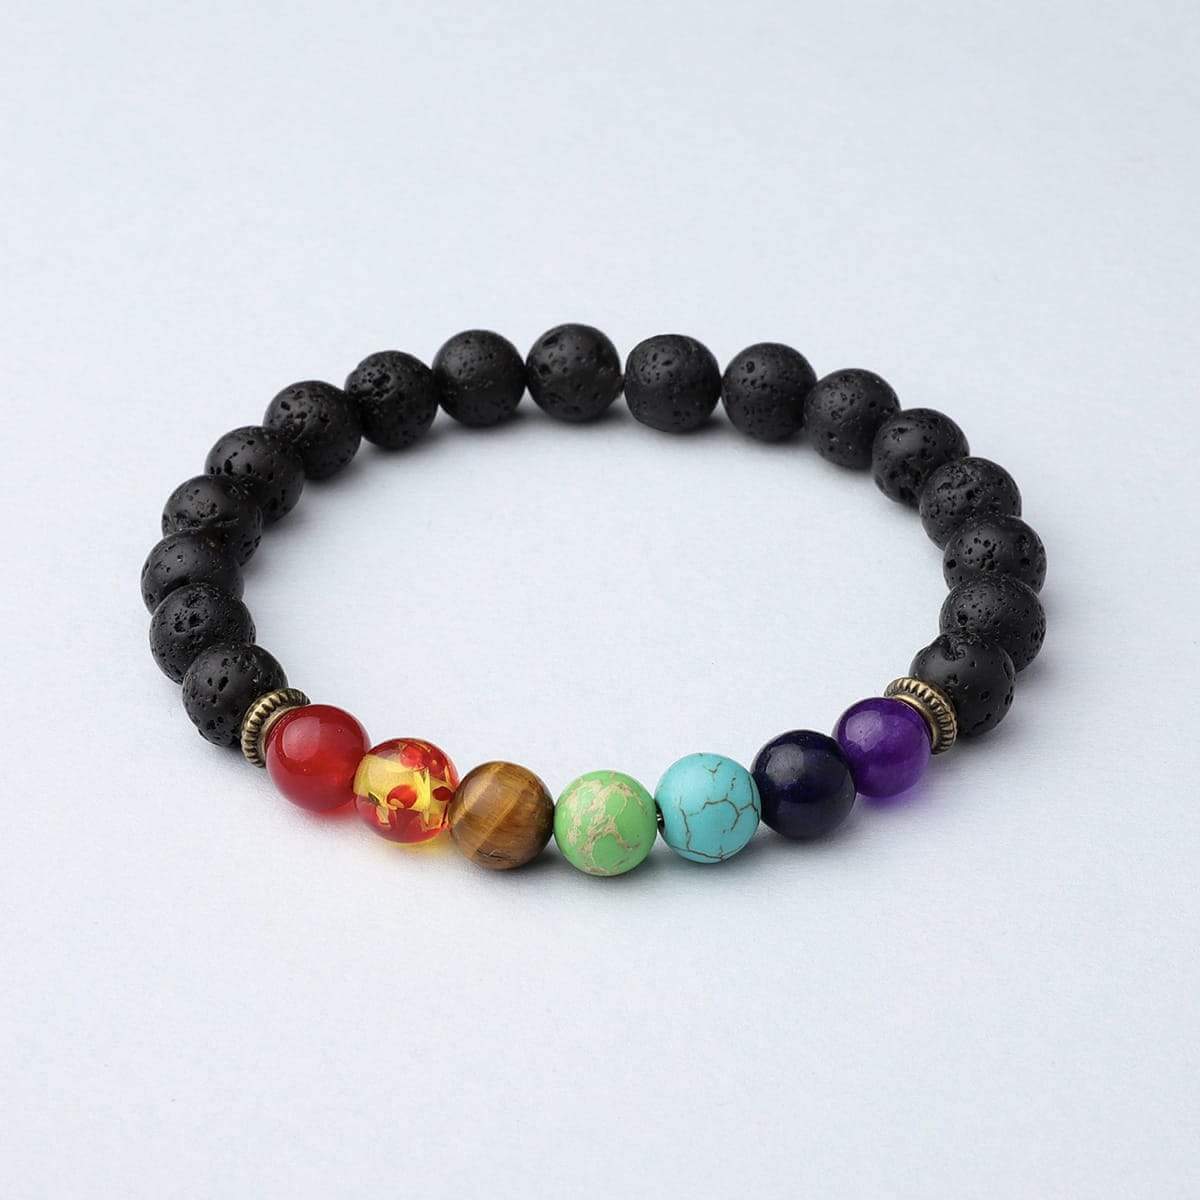 Adjustable bracelet with the natural stones of the Chakras.